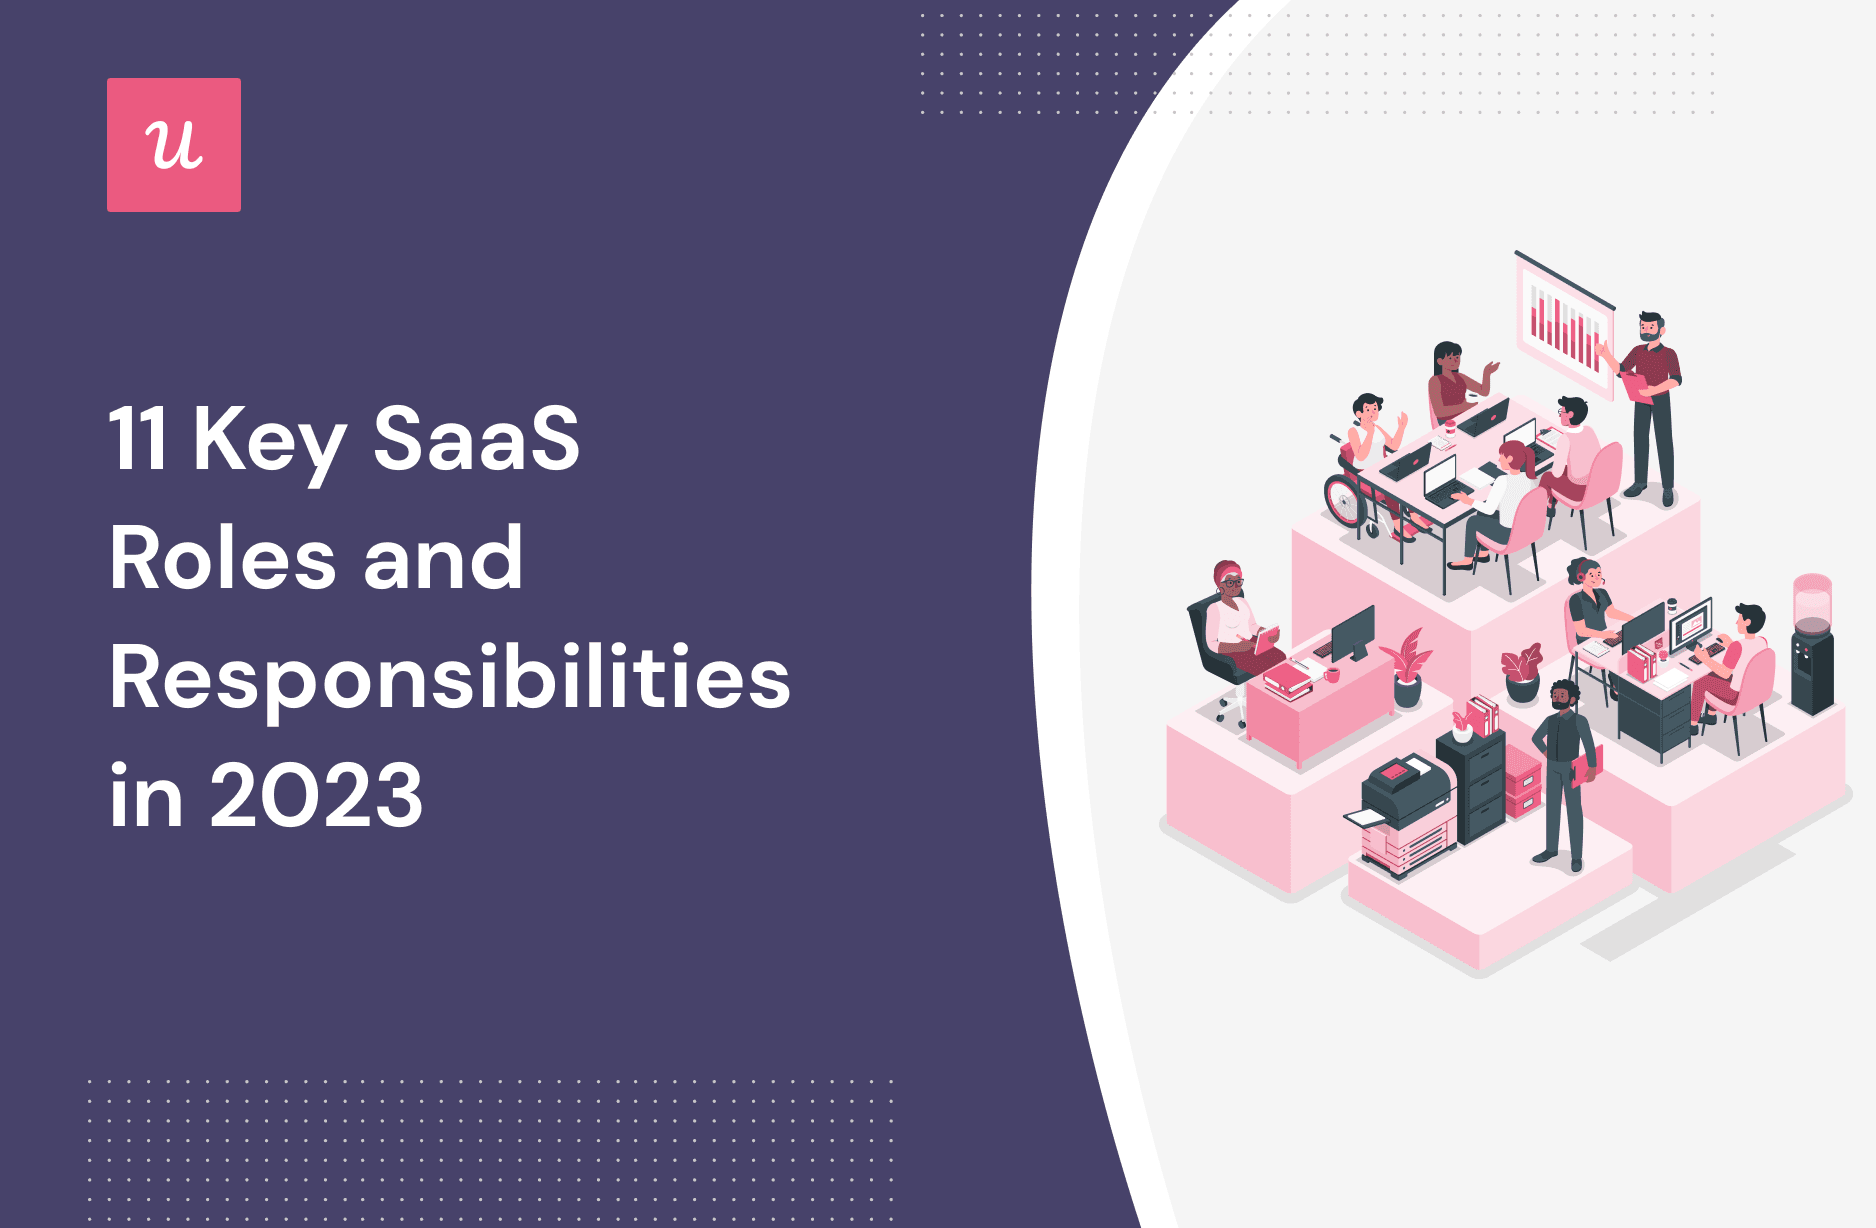 11 Key SaaS Roles and Responsibilities in 2023 cover